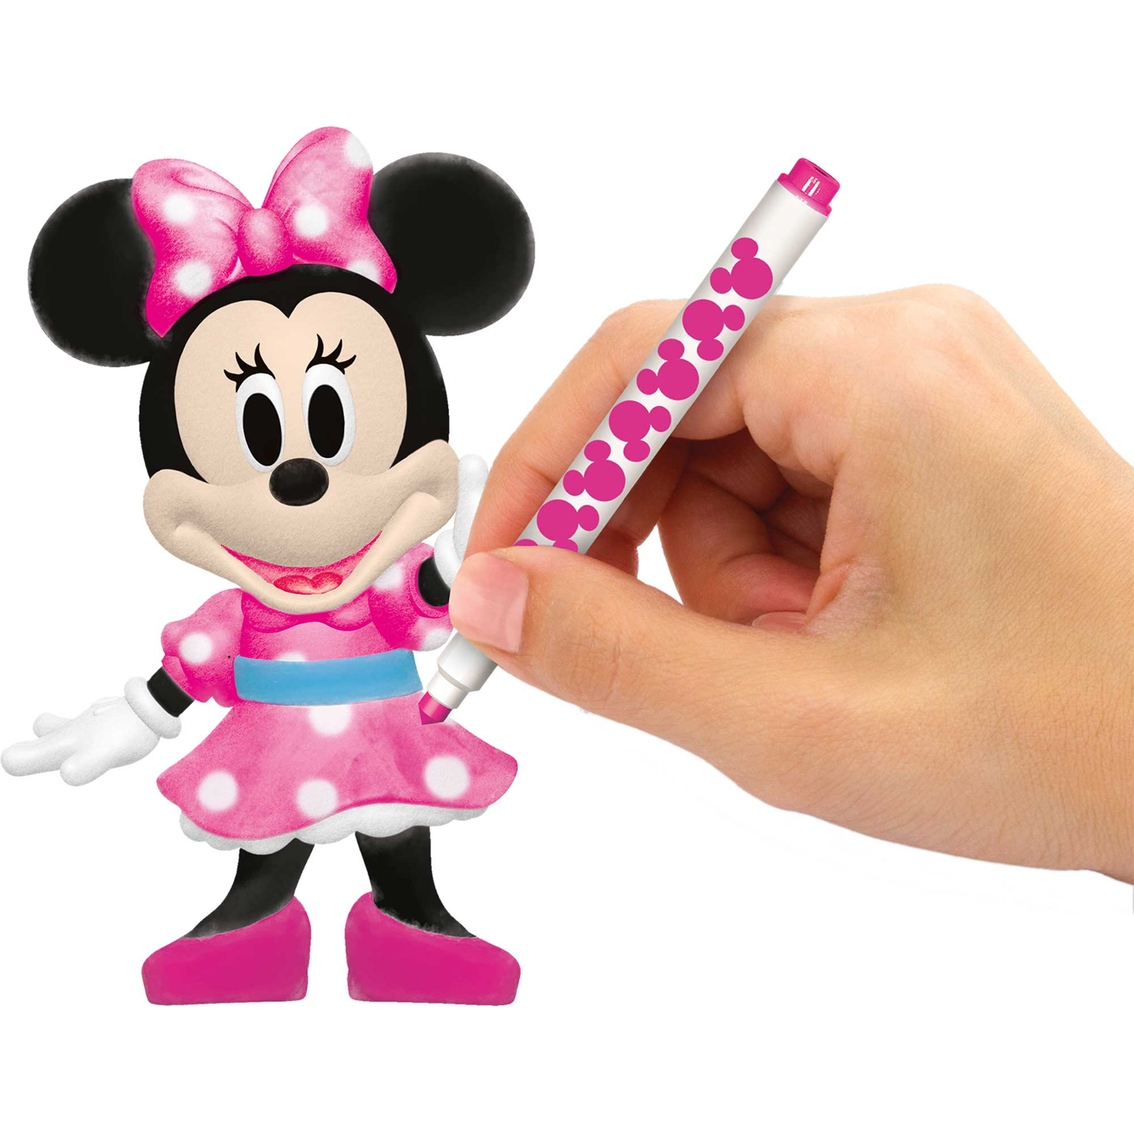 Cra-Z-Art Disney Mickey Mouse and Friends Color N' Recolor 3D Characters Set - Image 6 of 9